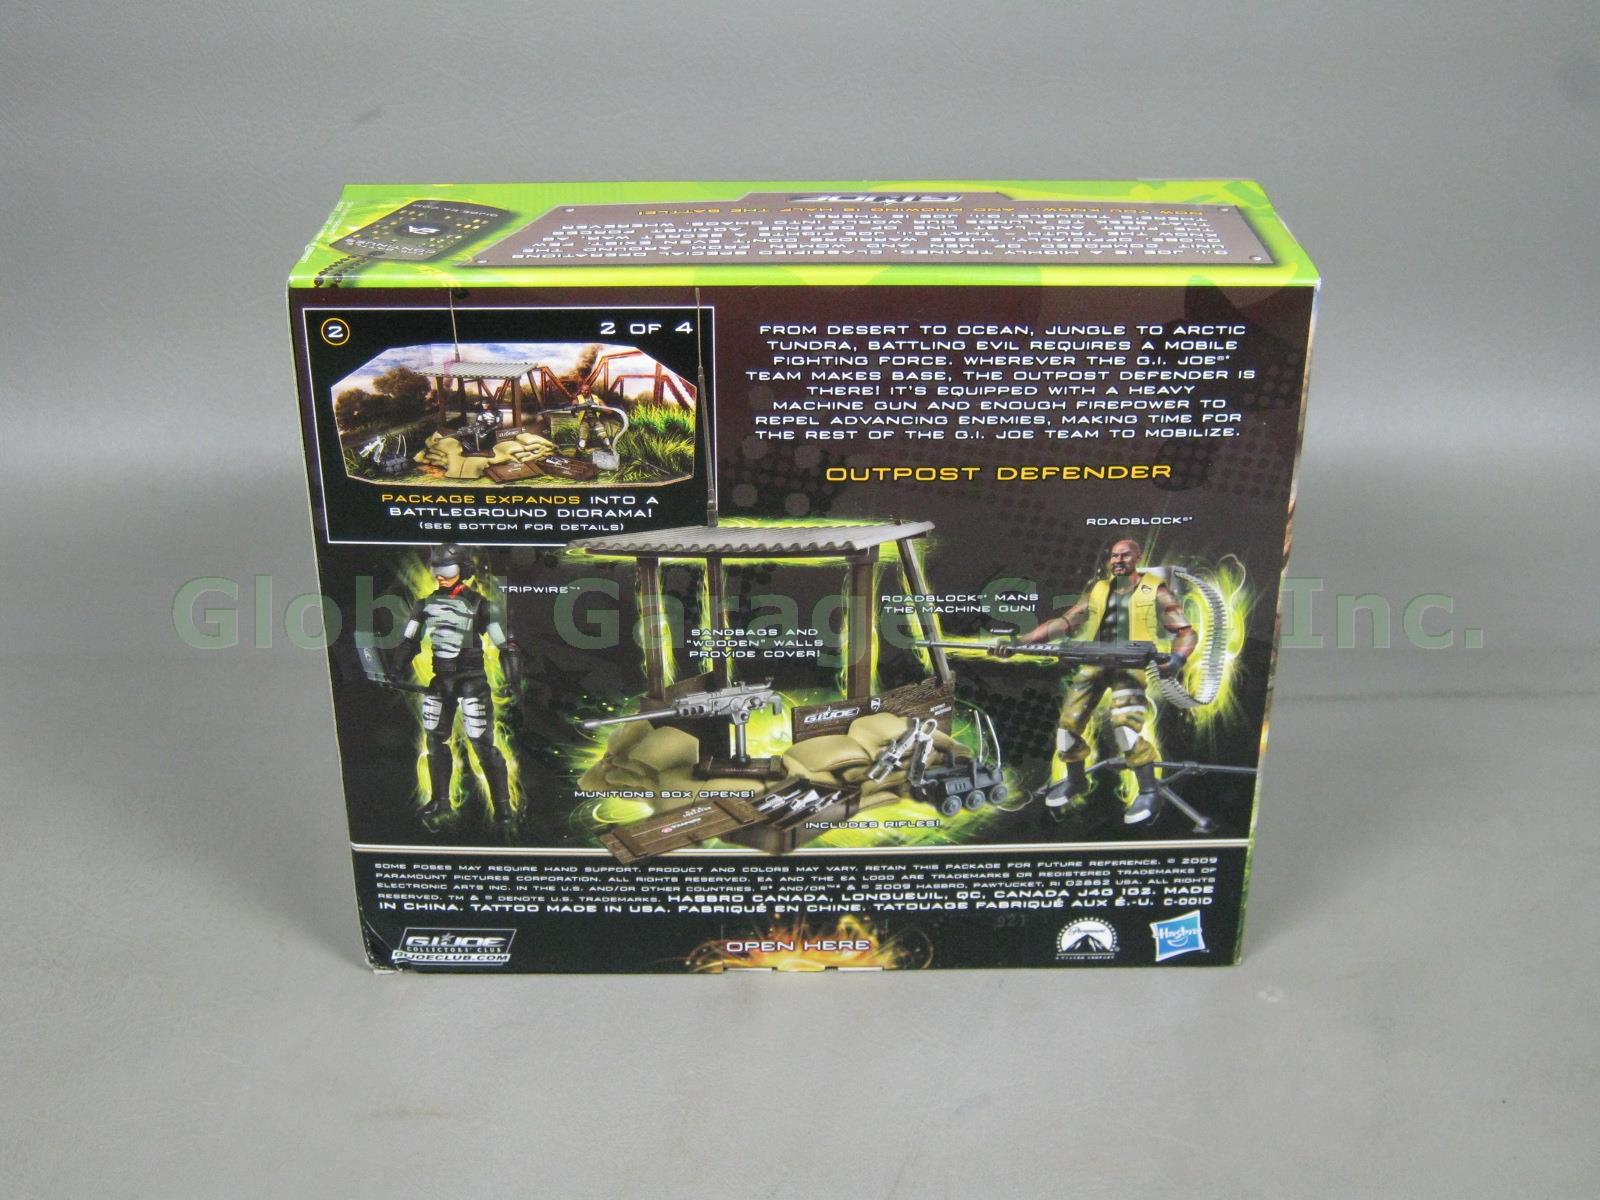 New Sealed 2009 GI Joe The Rise Of Cobra ROC Outpost Defender Walmart Exclusive 2